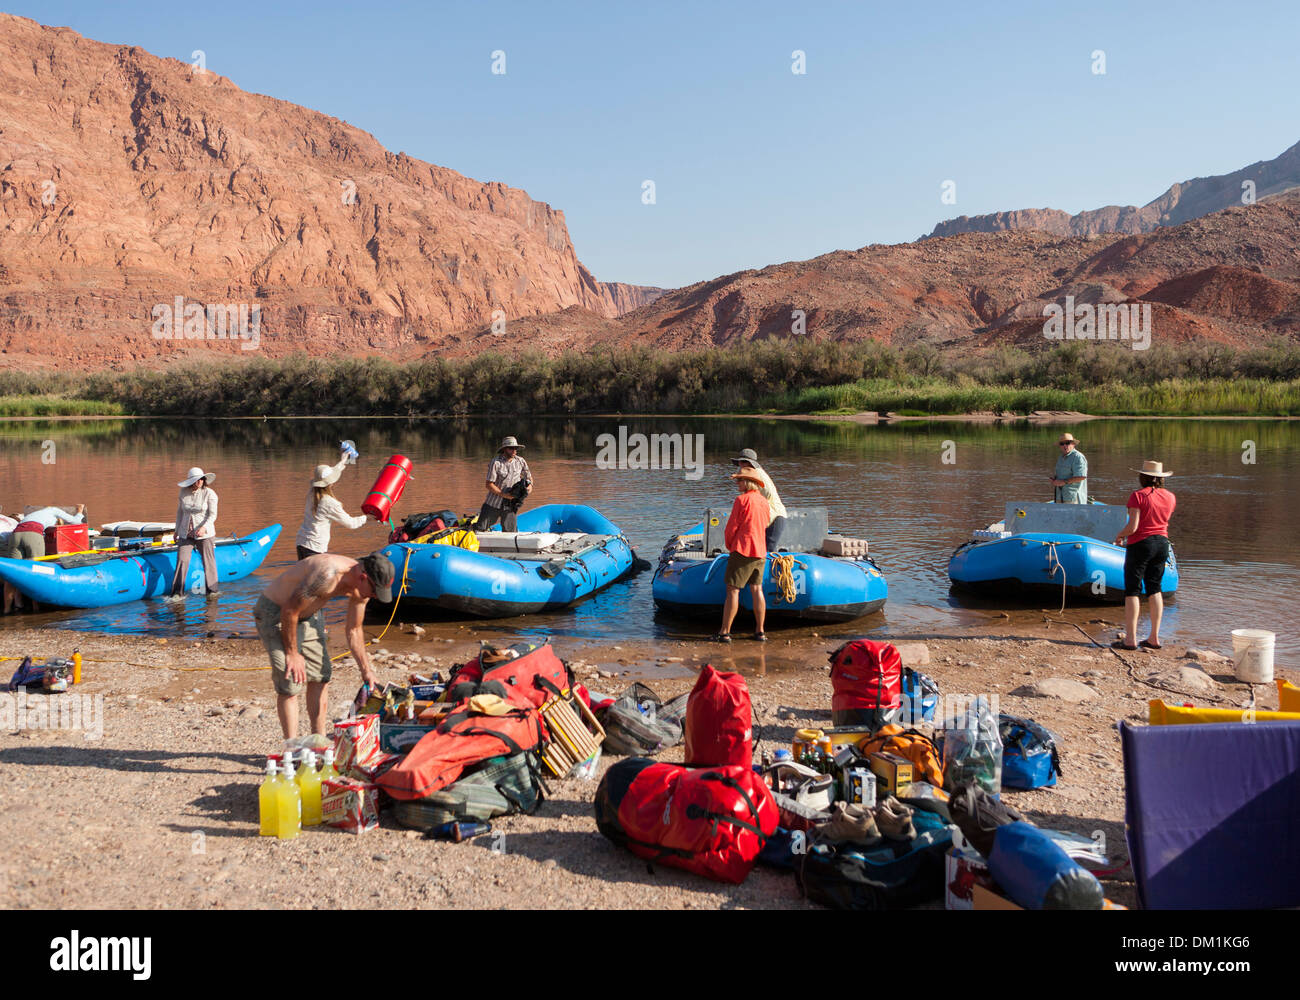 A group load and prepare their inflatable rafts at the beginning of a Grand Canyon rafting trip at Lee's Ferry, Arizona. Stock Photo